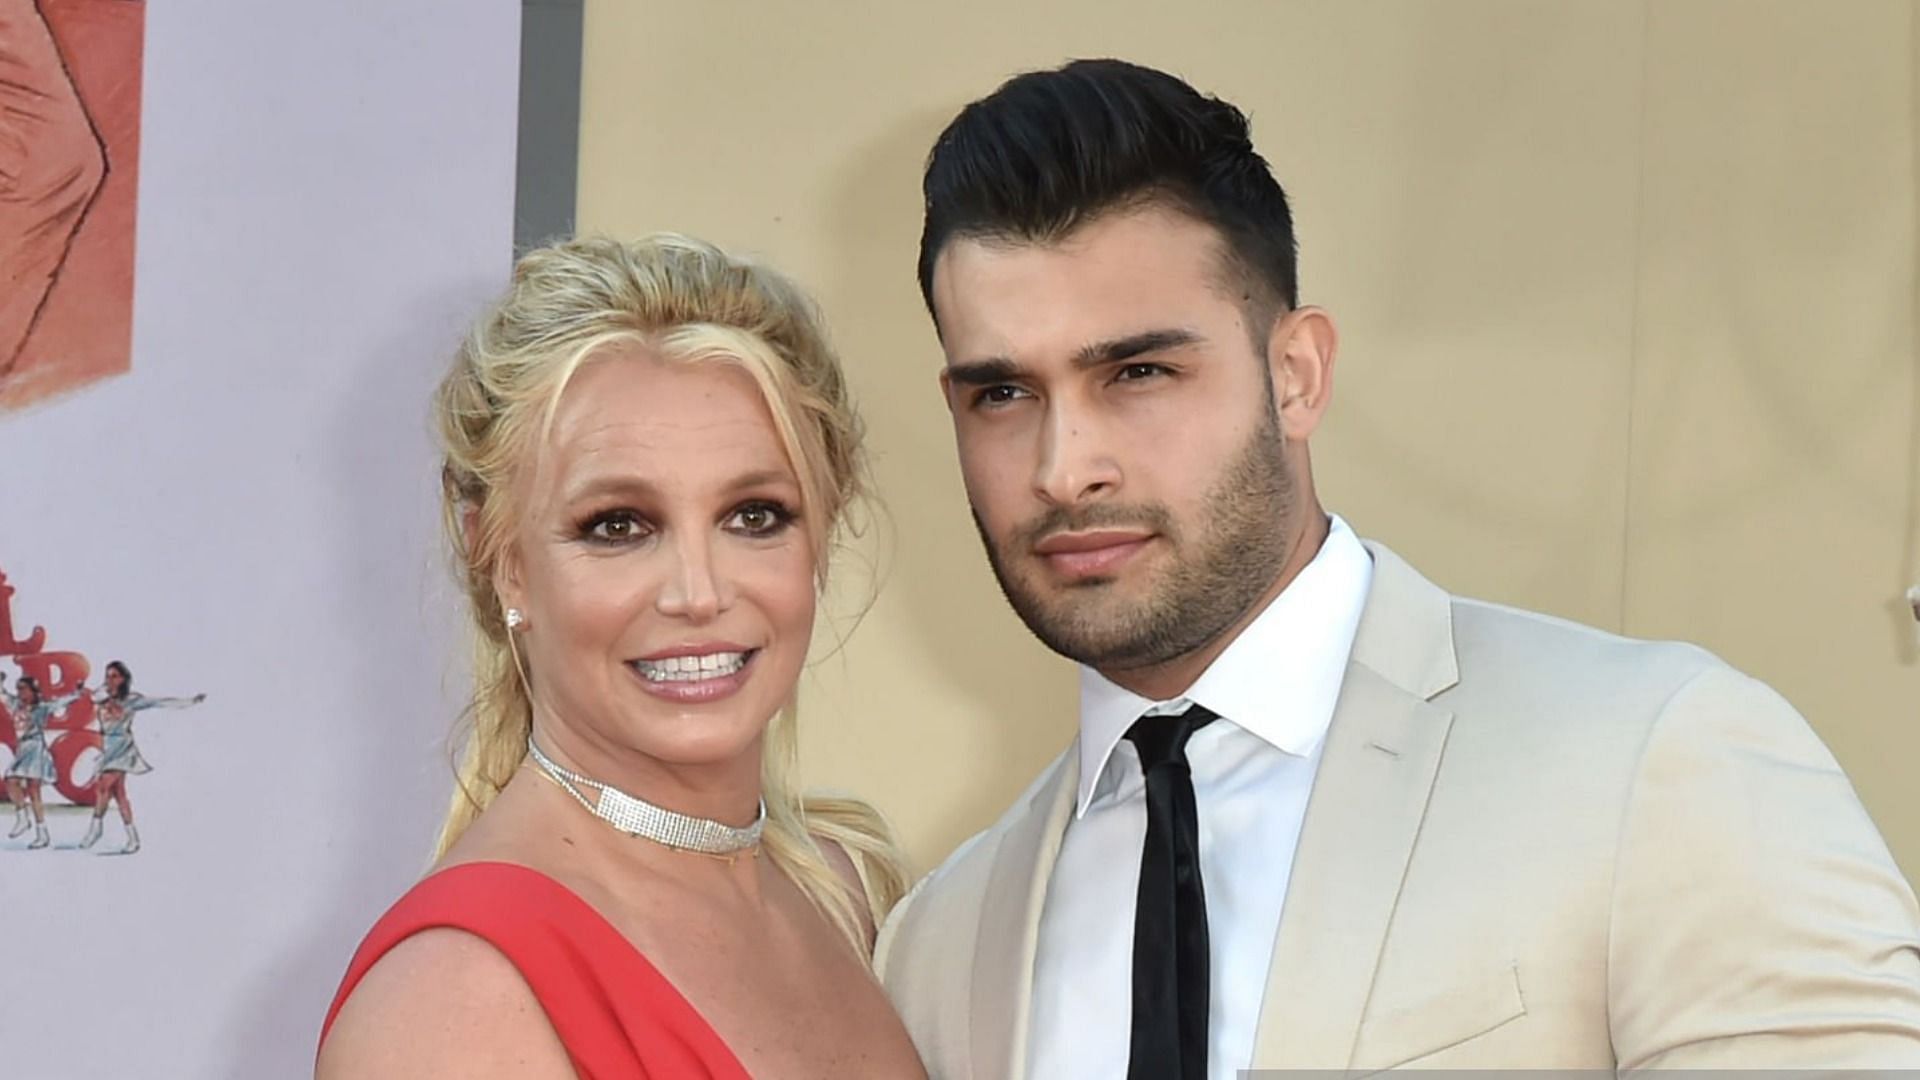 Britney Spears and Sam Asghari are expecting their first child together (Image via David Crotty/Getty Images)